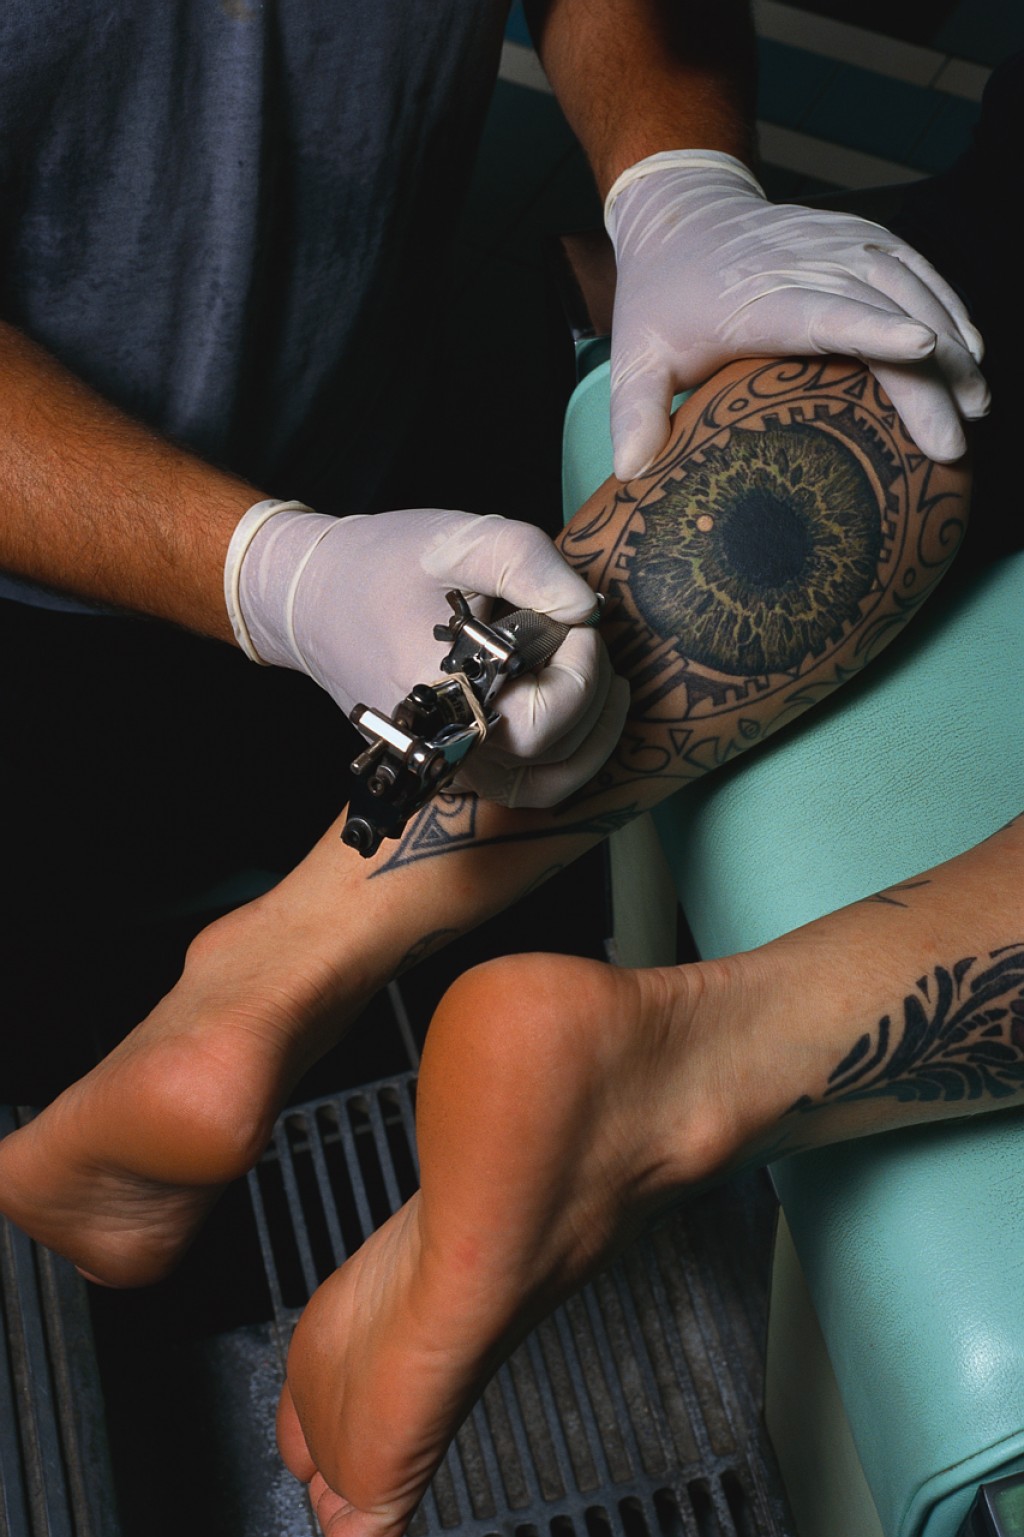 Tattoos - an outsider's point of view